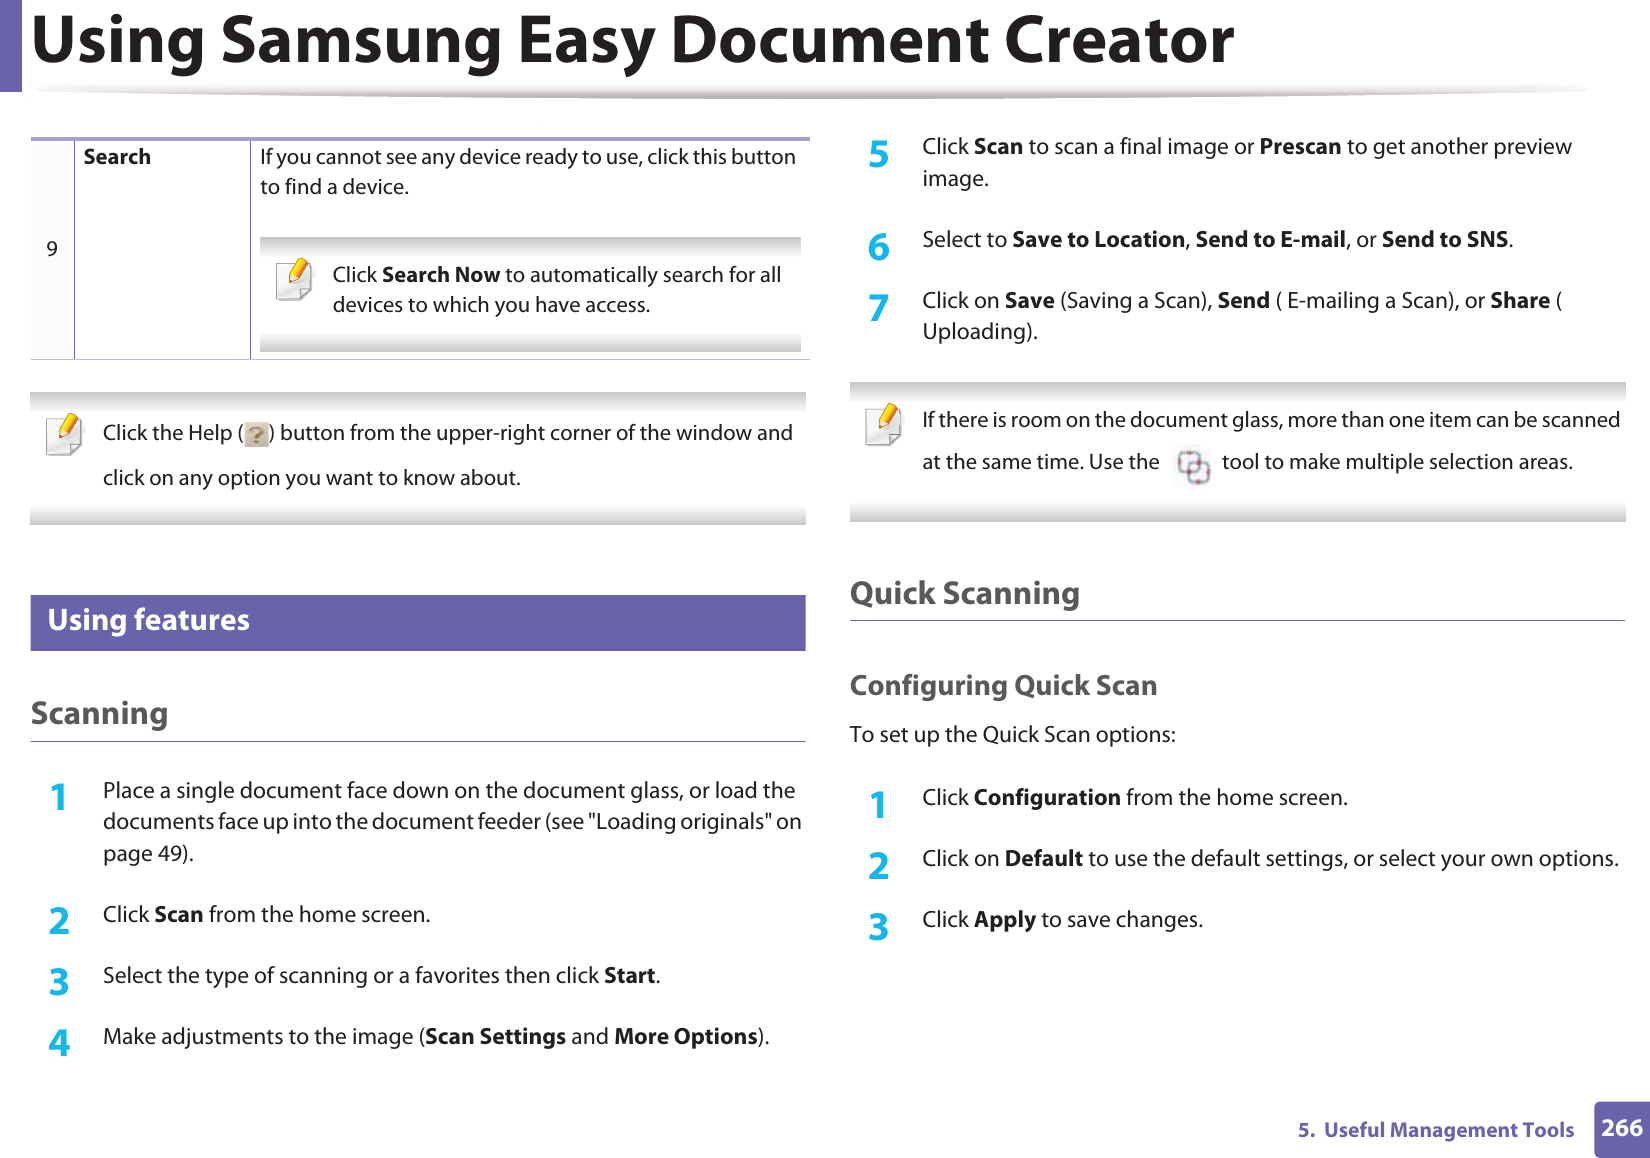 Using Samsung Easy Document Creator2665.  Useful Management Tools Click the Help ( ) button from the upper-right corner of the window andclick on any option you want to know about. 7 Using featuresScanning1Place a single document face down on the document glass, or load the documents face up into the document feeder (see &quot;Loading originals&quot; on page 49). 2  Click Scan from the home screen.3  Select the type of scanning or a favorites then click Start.4  Make adjustments to the image (Scan Settings and More Options).5  Click Scan to scan a final image or Prescan to get another preview image.6  Select to Save to Location, Send to E-mail, or Send to SNS.7  Click on Save (Saving a Scan), Send ( E-mailing a Scan), or Share ( Uploading). If there is room on the document glass, more than one item can be scanned at the same time. Use the    tool to make multiple selection areas. Quick ScanningConfiguring Quick ScanTo set up the Quick Scan options:1Click Configuration from the home screen.2  Click on Default to use the default settings, or select your own options.3  Click Apply to save changes.9Search If you cannot see any device ready to use, click this button to find a device. Click Search Now to automatically search for all devices to which you have access. 